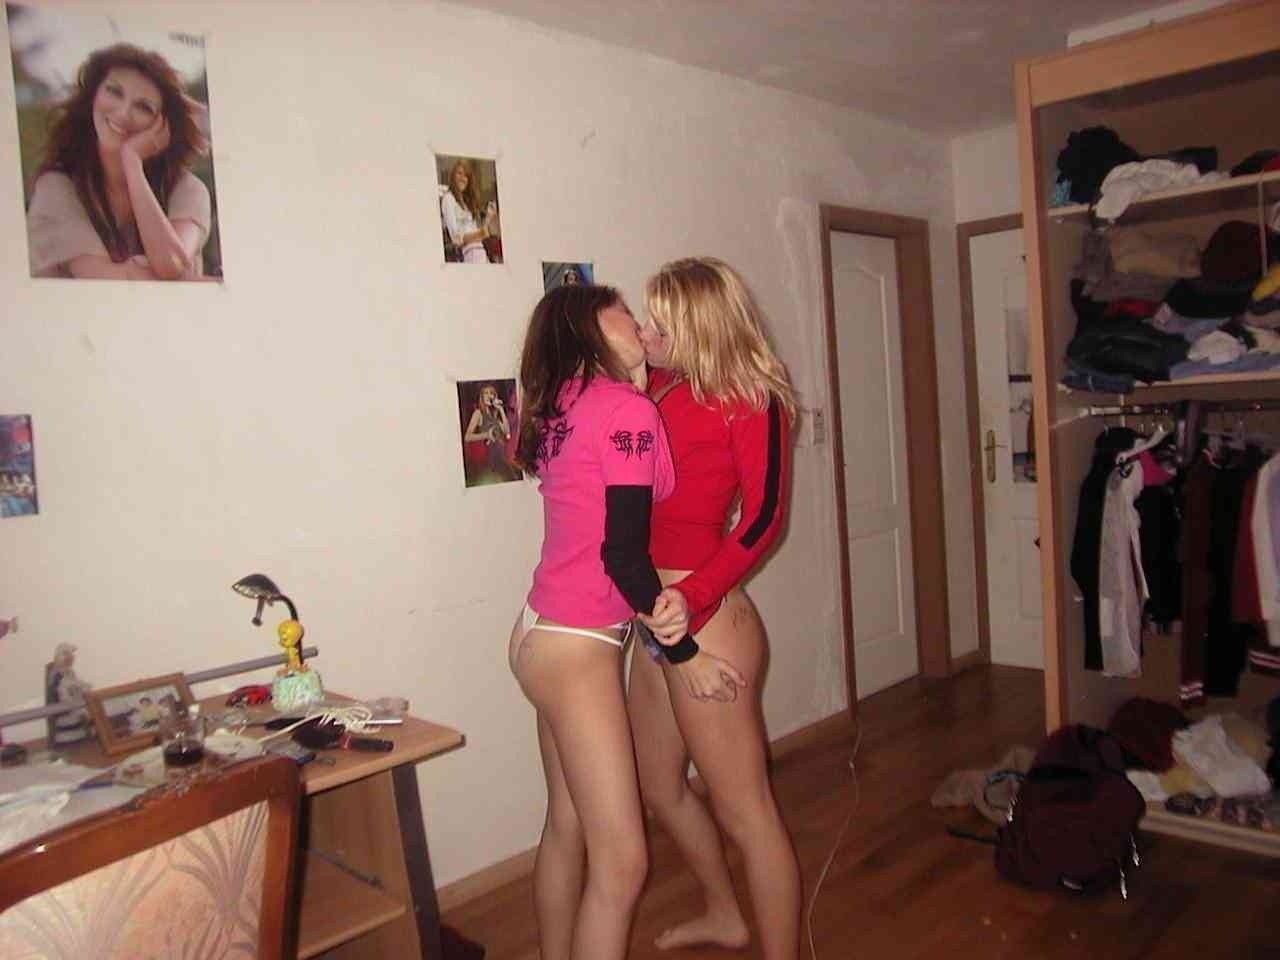 Hot Drunk College Girls Flashing In Public Crazy Teens On Vacation #76395054